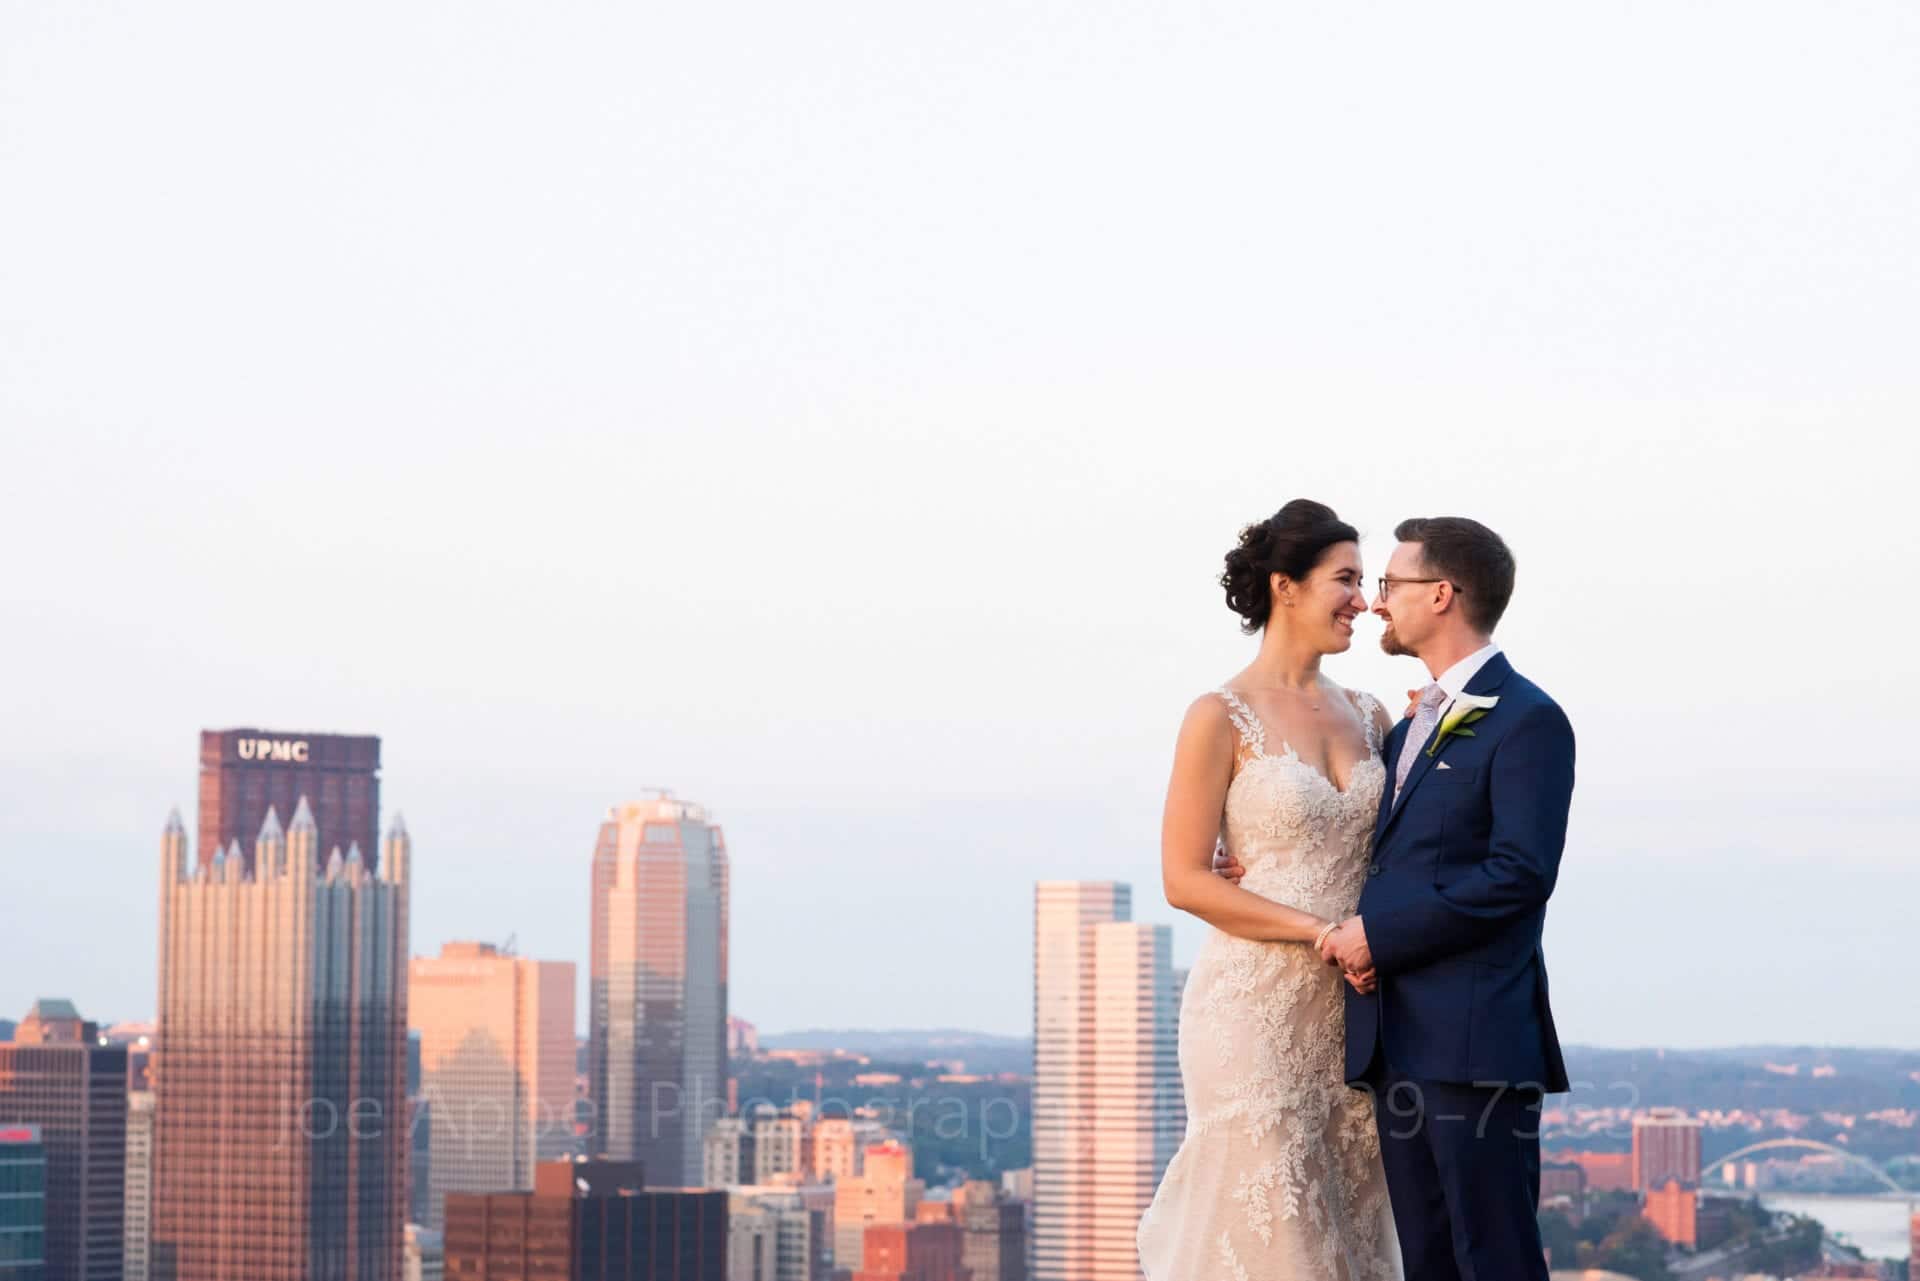 A bride and groom face each other as they stand high above the skyline of the city of Pittsburgh at sunset best 2017 wedding photos.